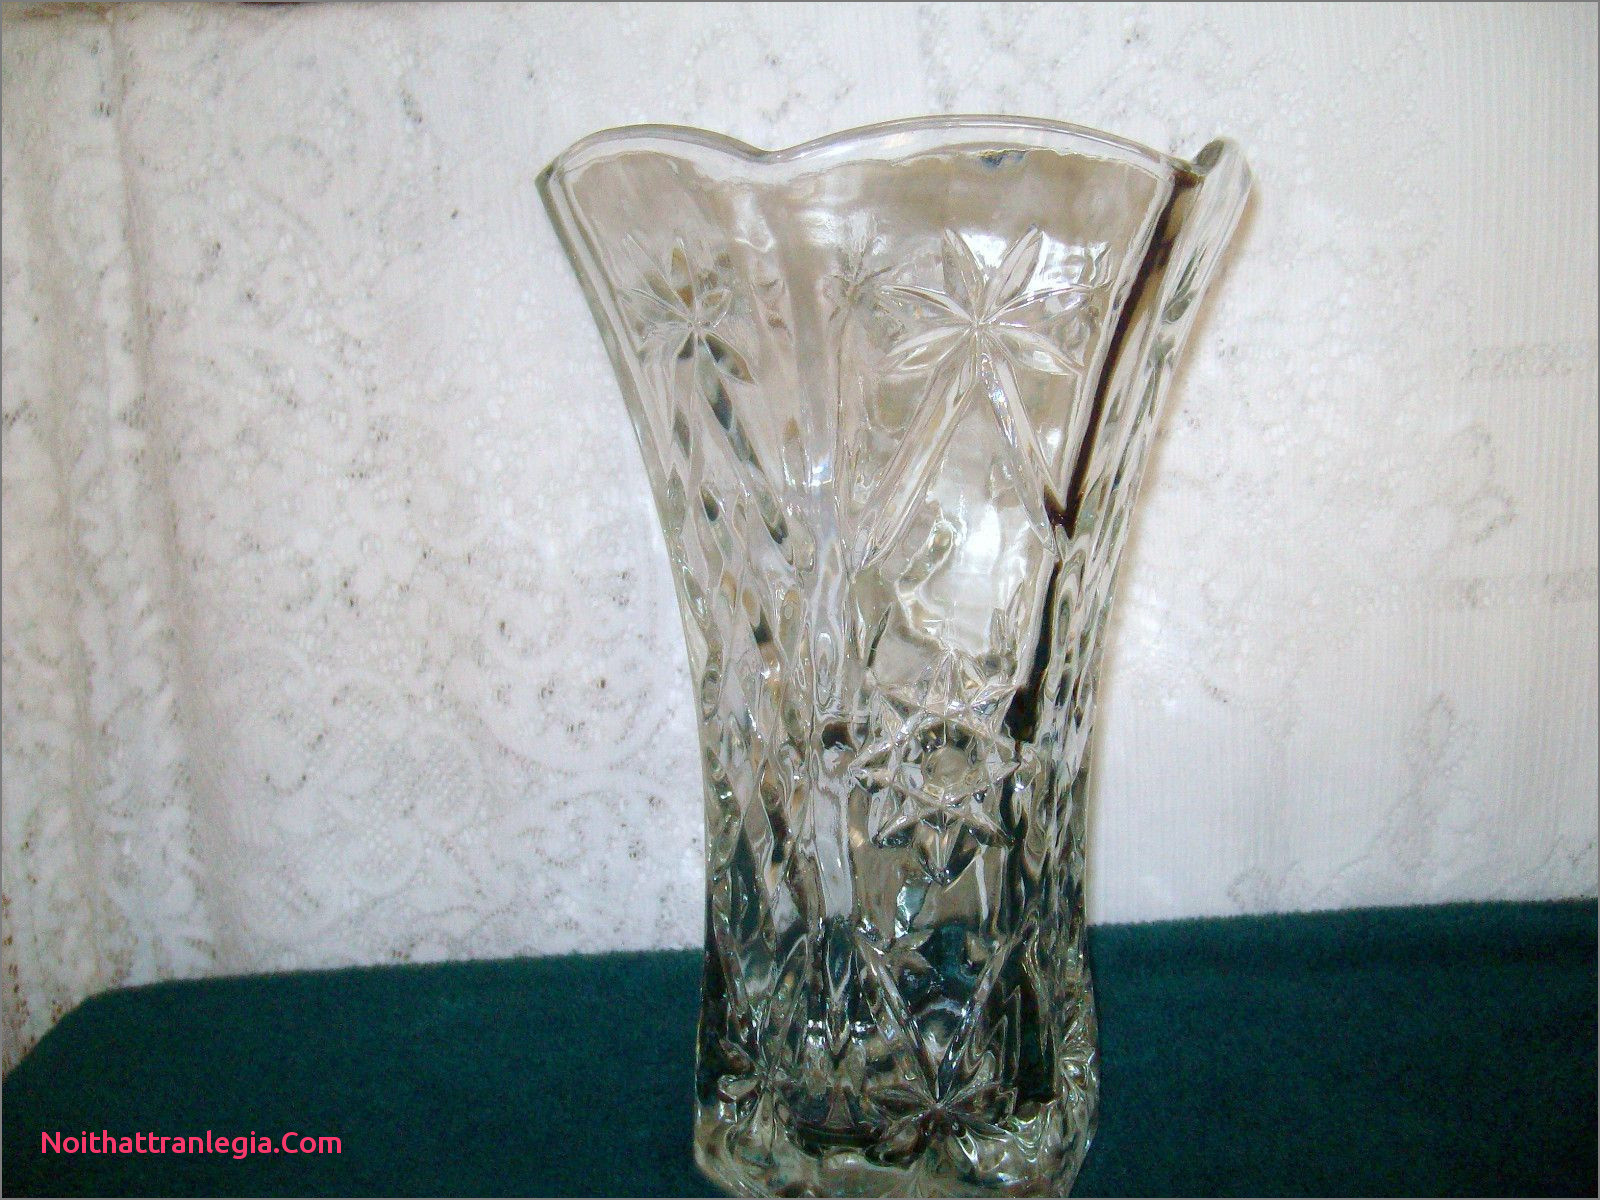 18 Stylish Vintage Waterford Vase 2024 free download vintage waterford vase of 20 cut glass antique vase noithattranlegia vases design throughout vintage heavy depression cut glass vase 10 1 2 tall ruffled edges